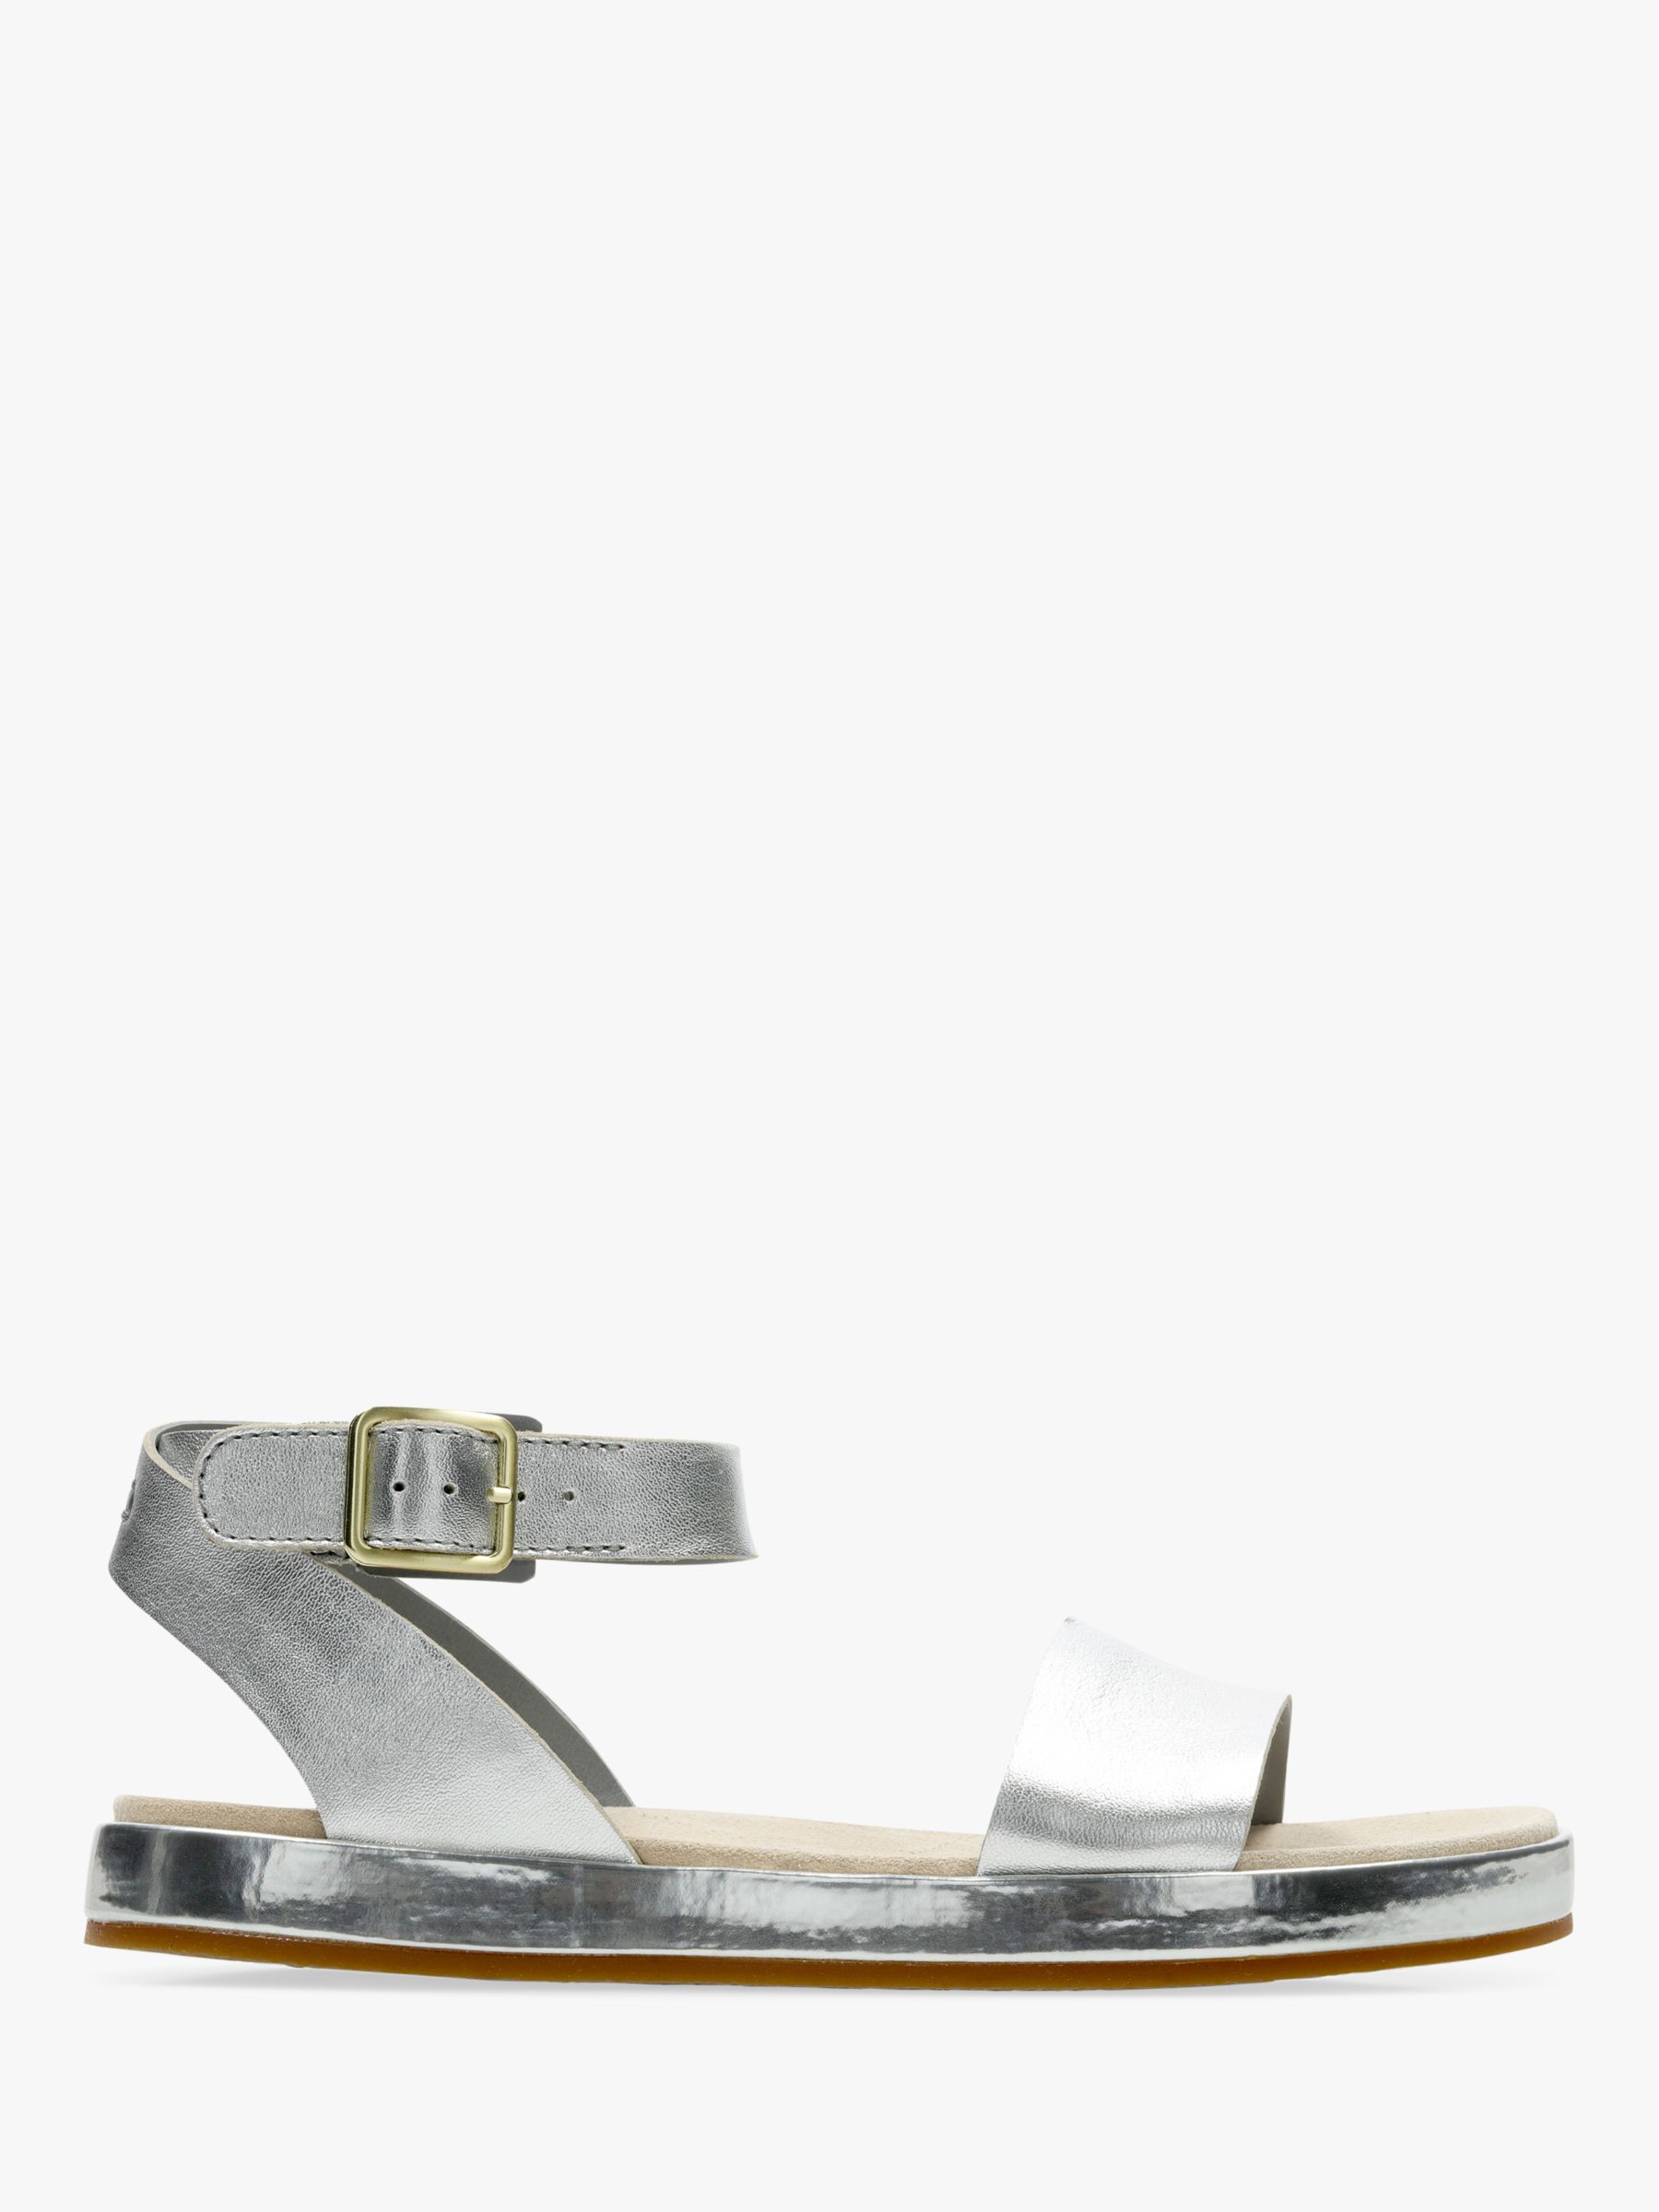 Clarks Ivy Footbed Sandals, Silver at John Lewis & Partners